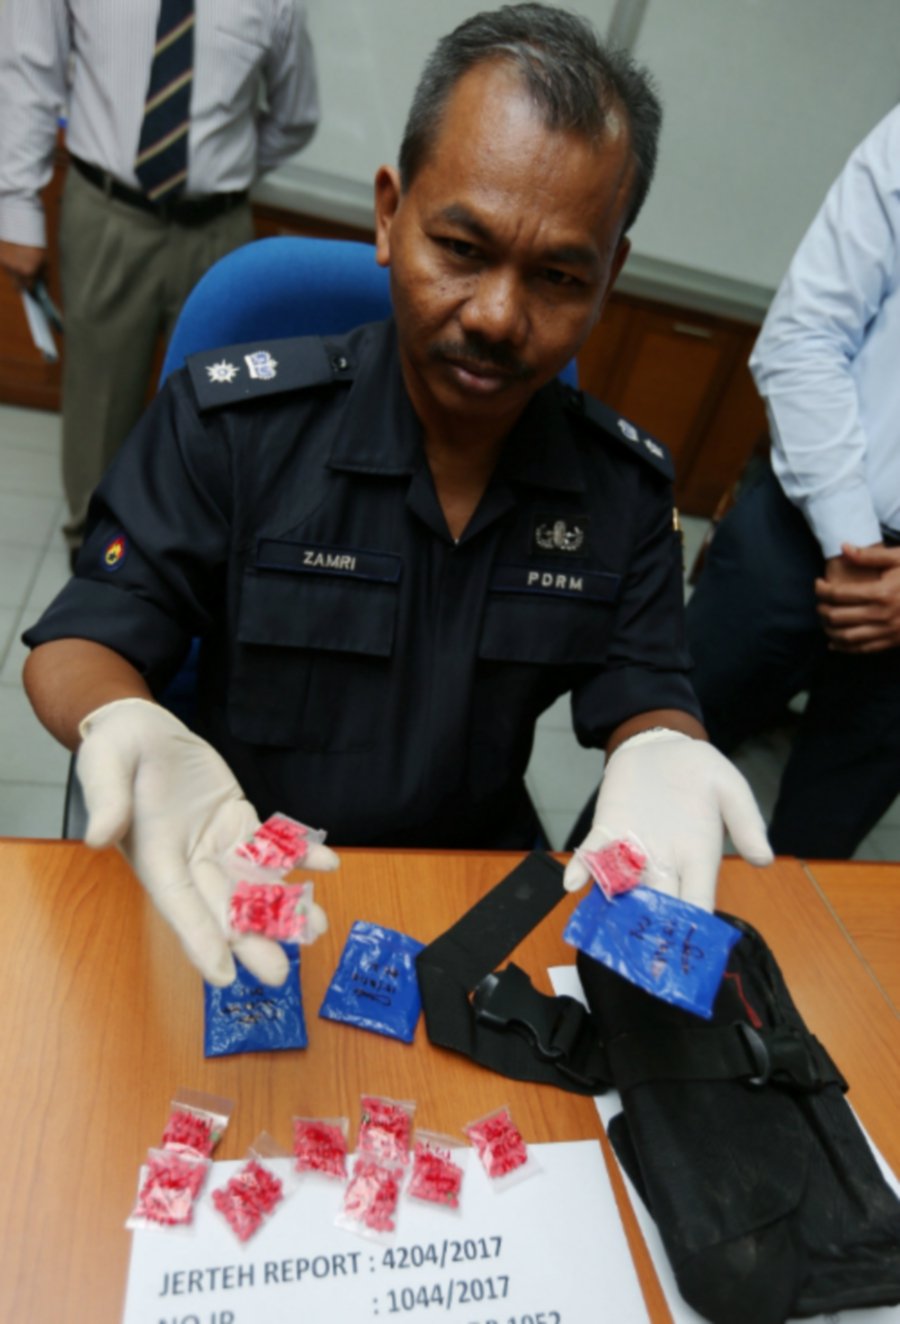 Besut cops on lookout for suspected trafficker who dropped bag containing drugs worth RM5500